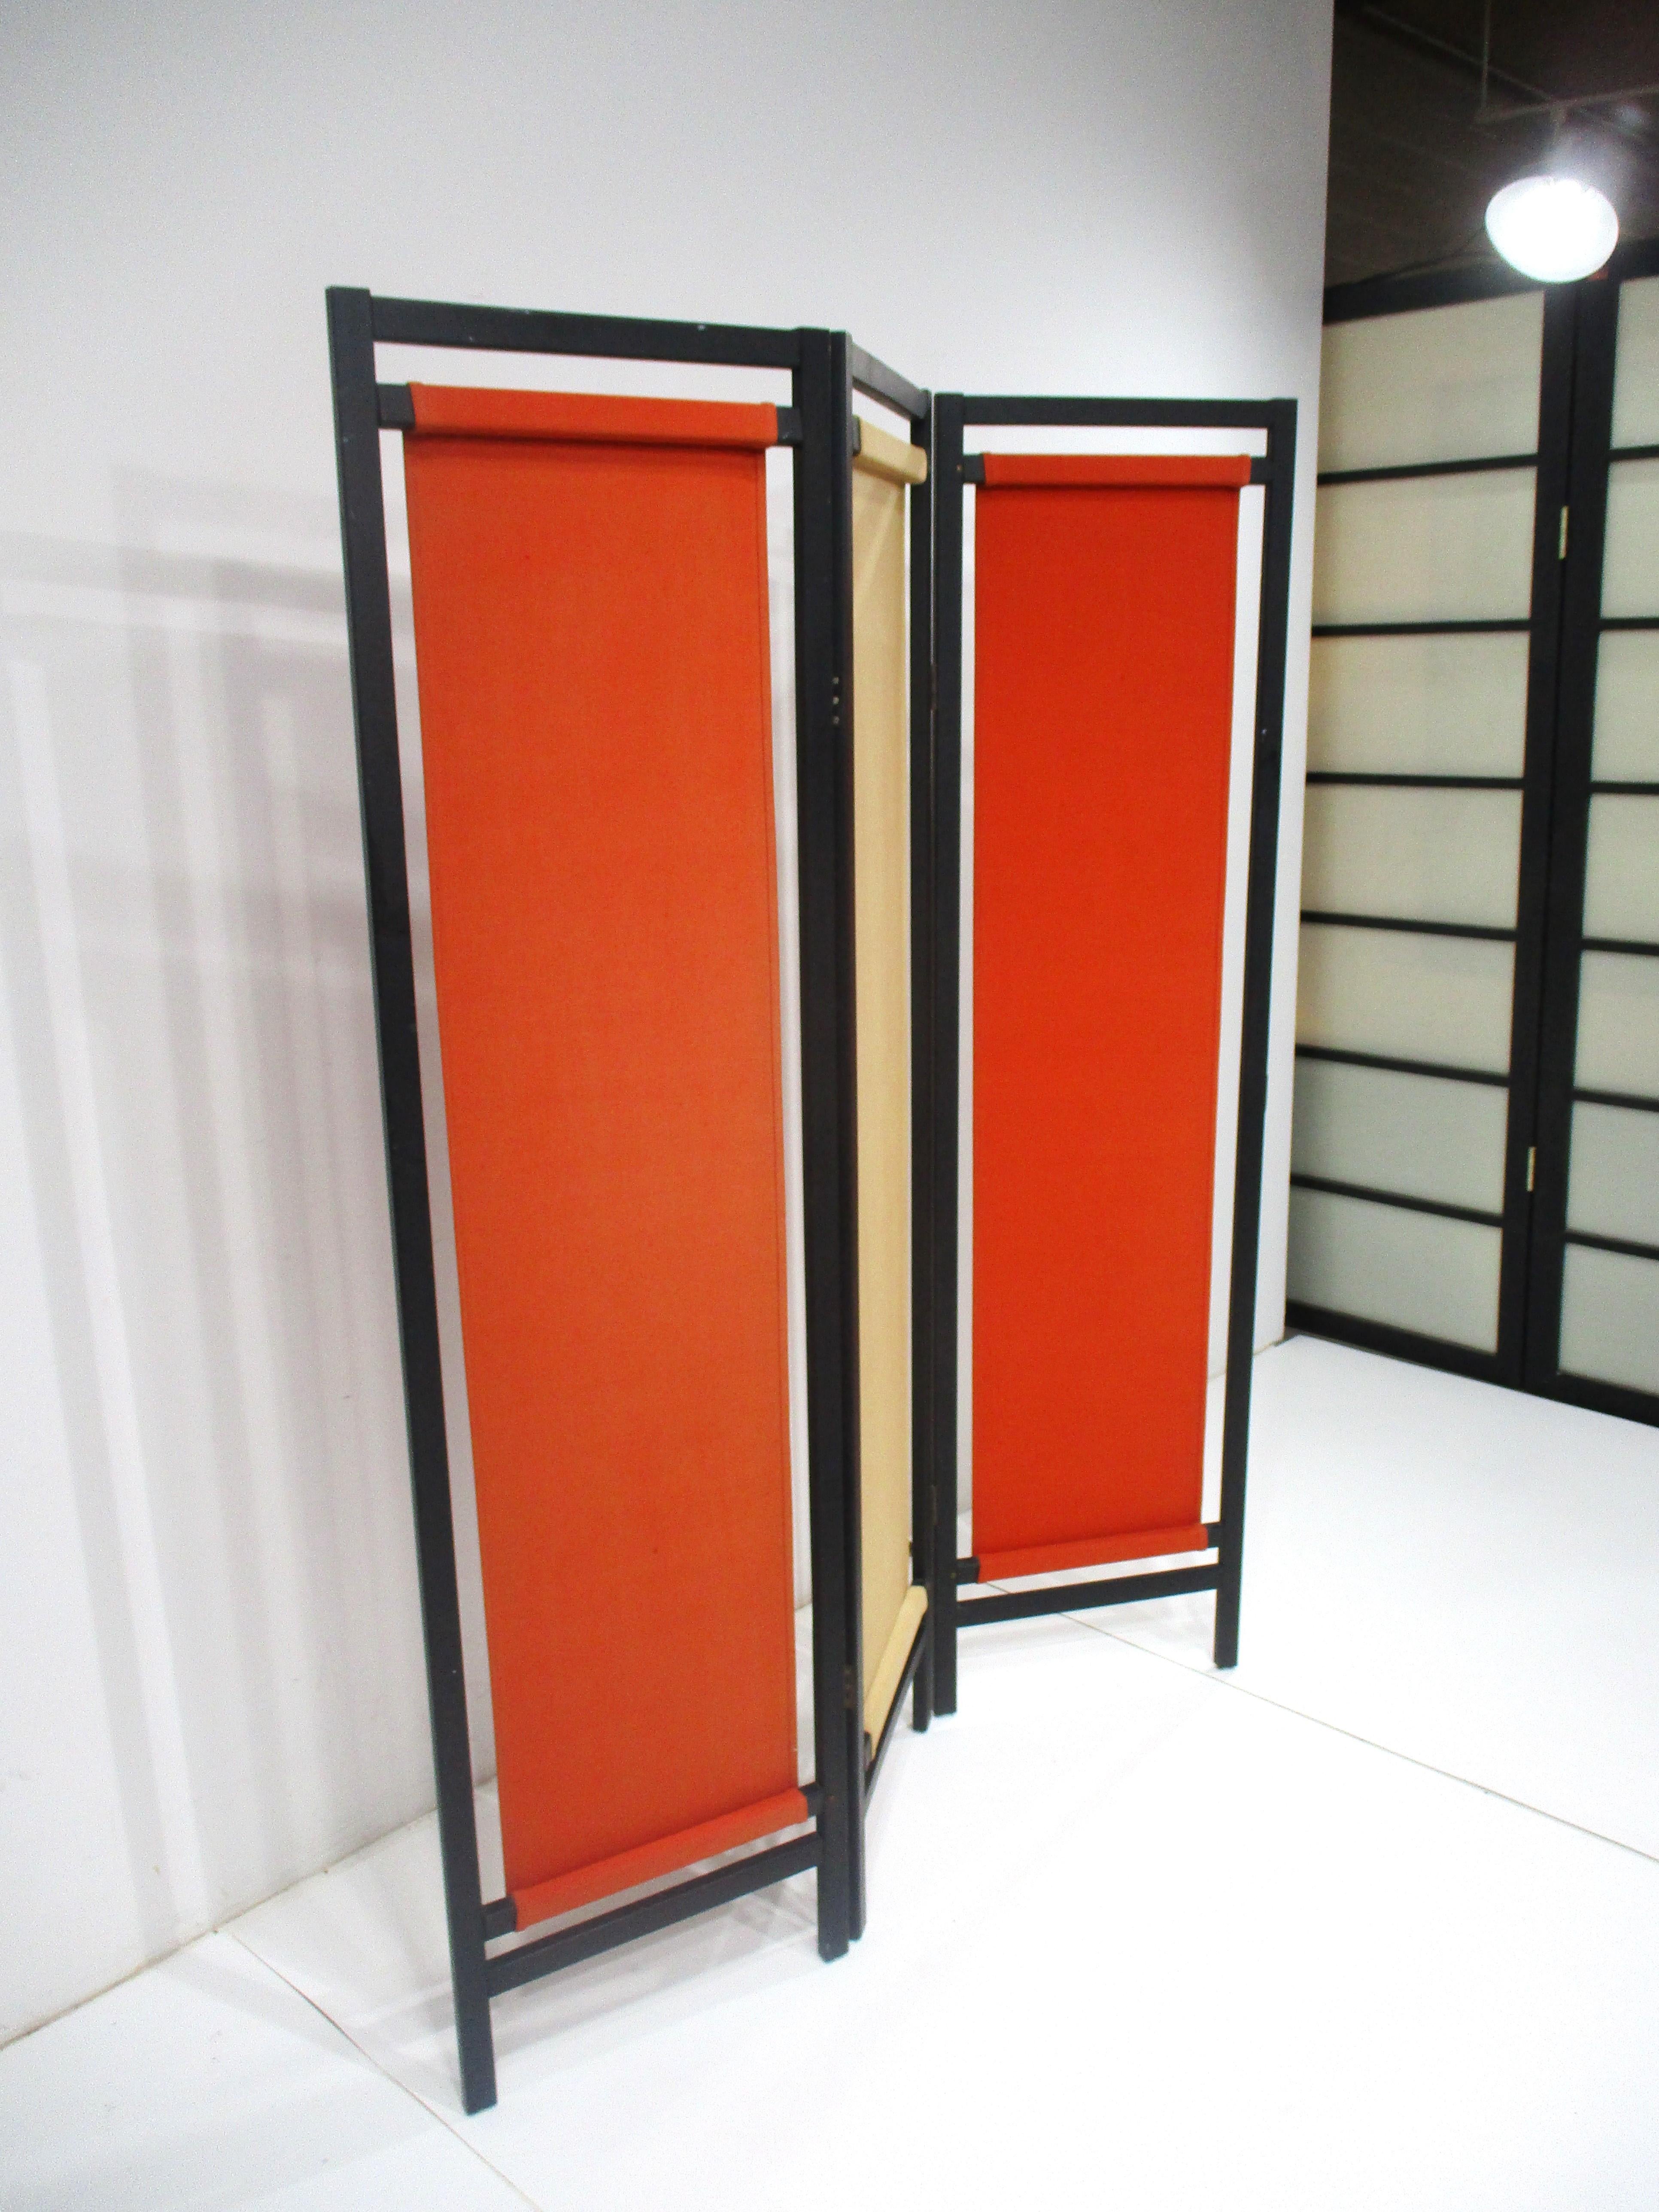 A colorful three panel folding screen with canvas inserts in burnt orange and tan . The screen is highlighted by a satin black wood frame which would give a room that extra detail and punch of rich color . Manufactured by the Gold Metal Folding